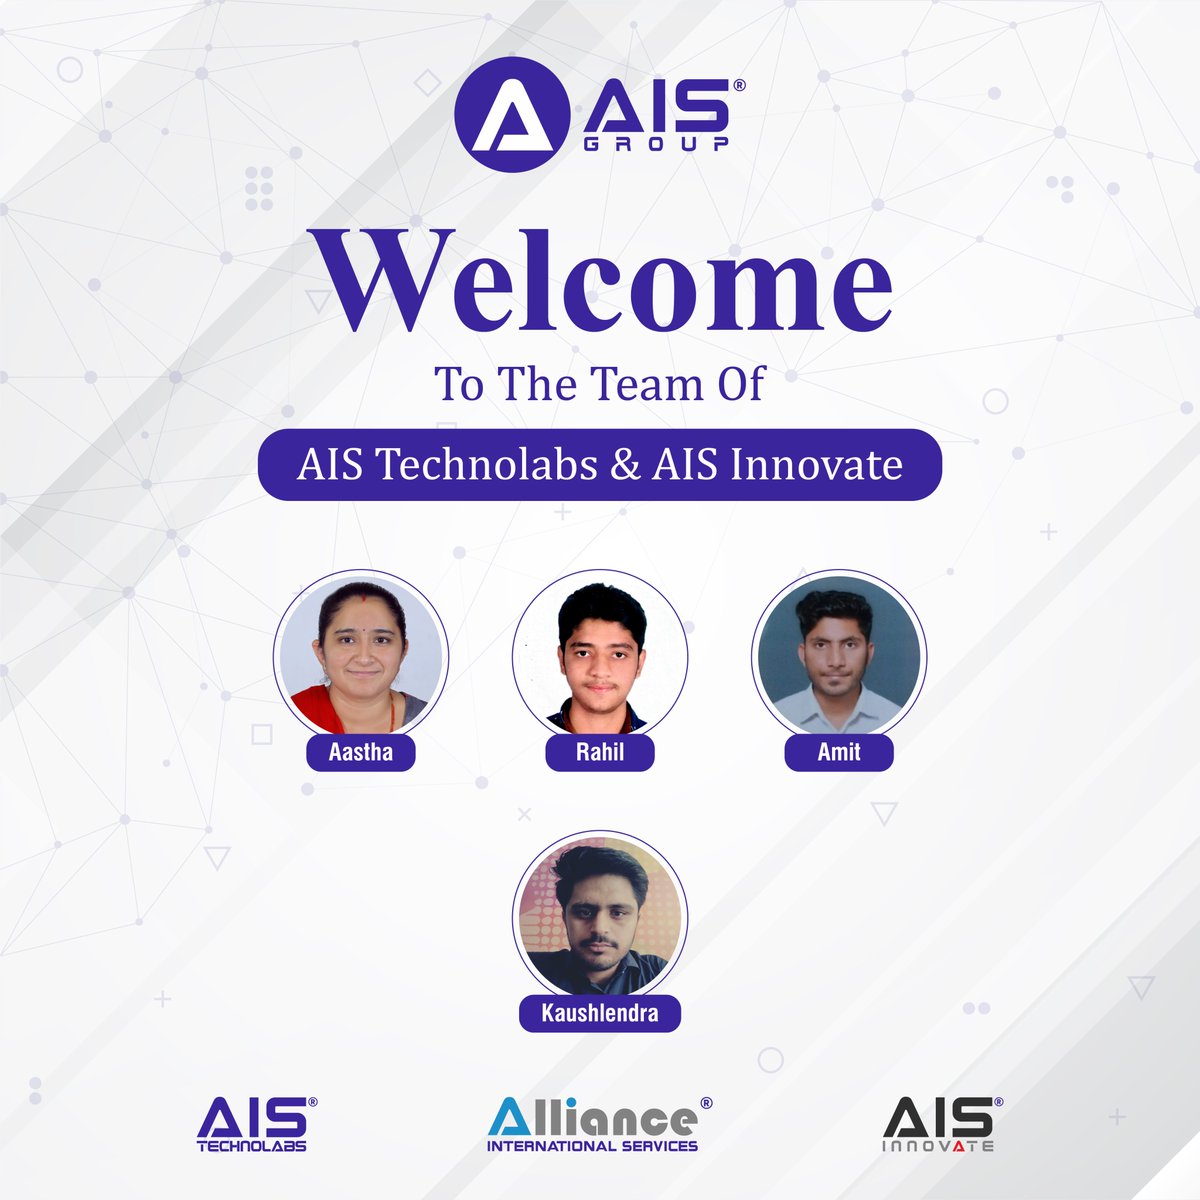 Cheers to our newest team members joining the AIS Group! Here's to a journey filled with collaboration, growth, and endless opportunities ahead.

#welcometoaisgroup #onboarding #employeeexperience #newjoinee #employeeengagement #AISTechnolabs  #ahmedabad